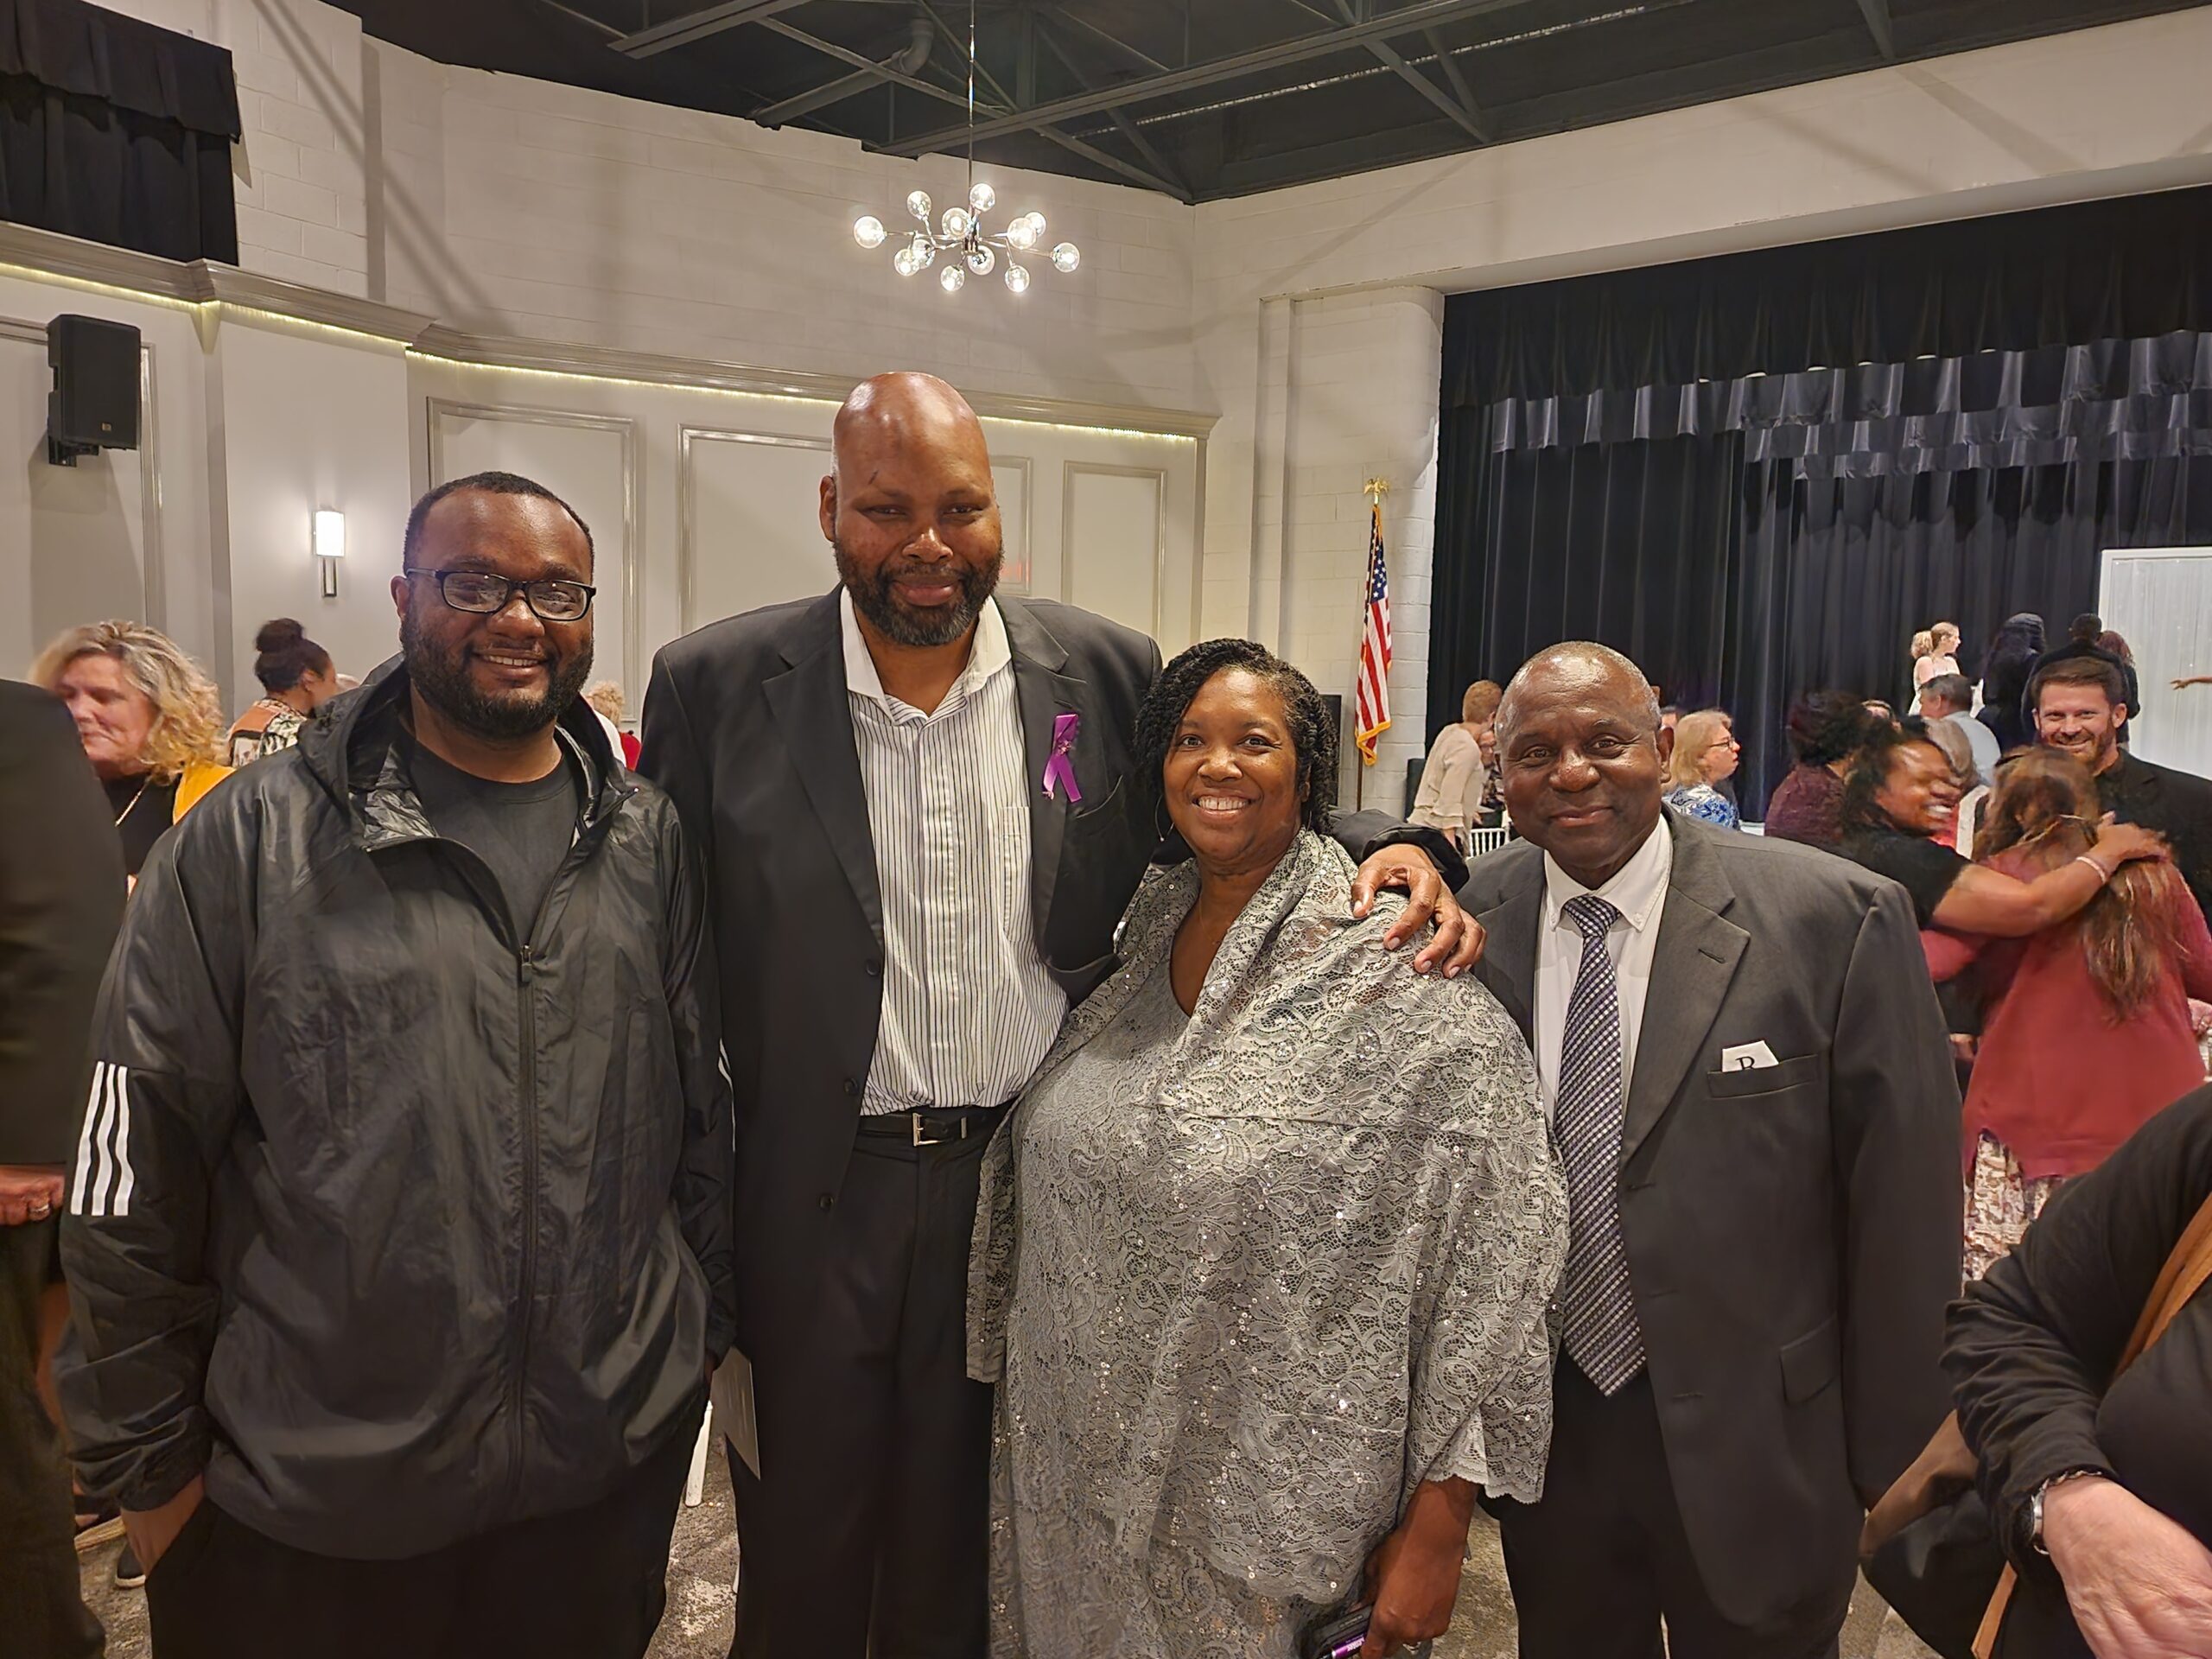 Members of New Life Ministries collaborated with us for the Selah Fundraising Gala!